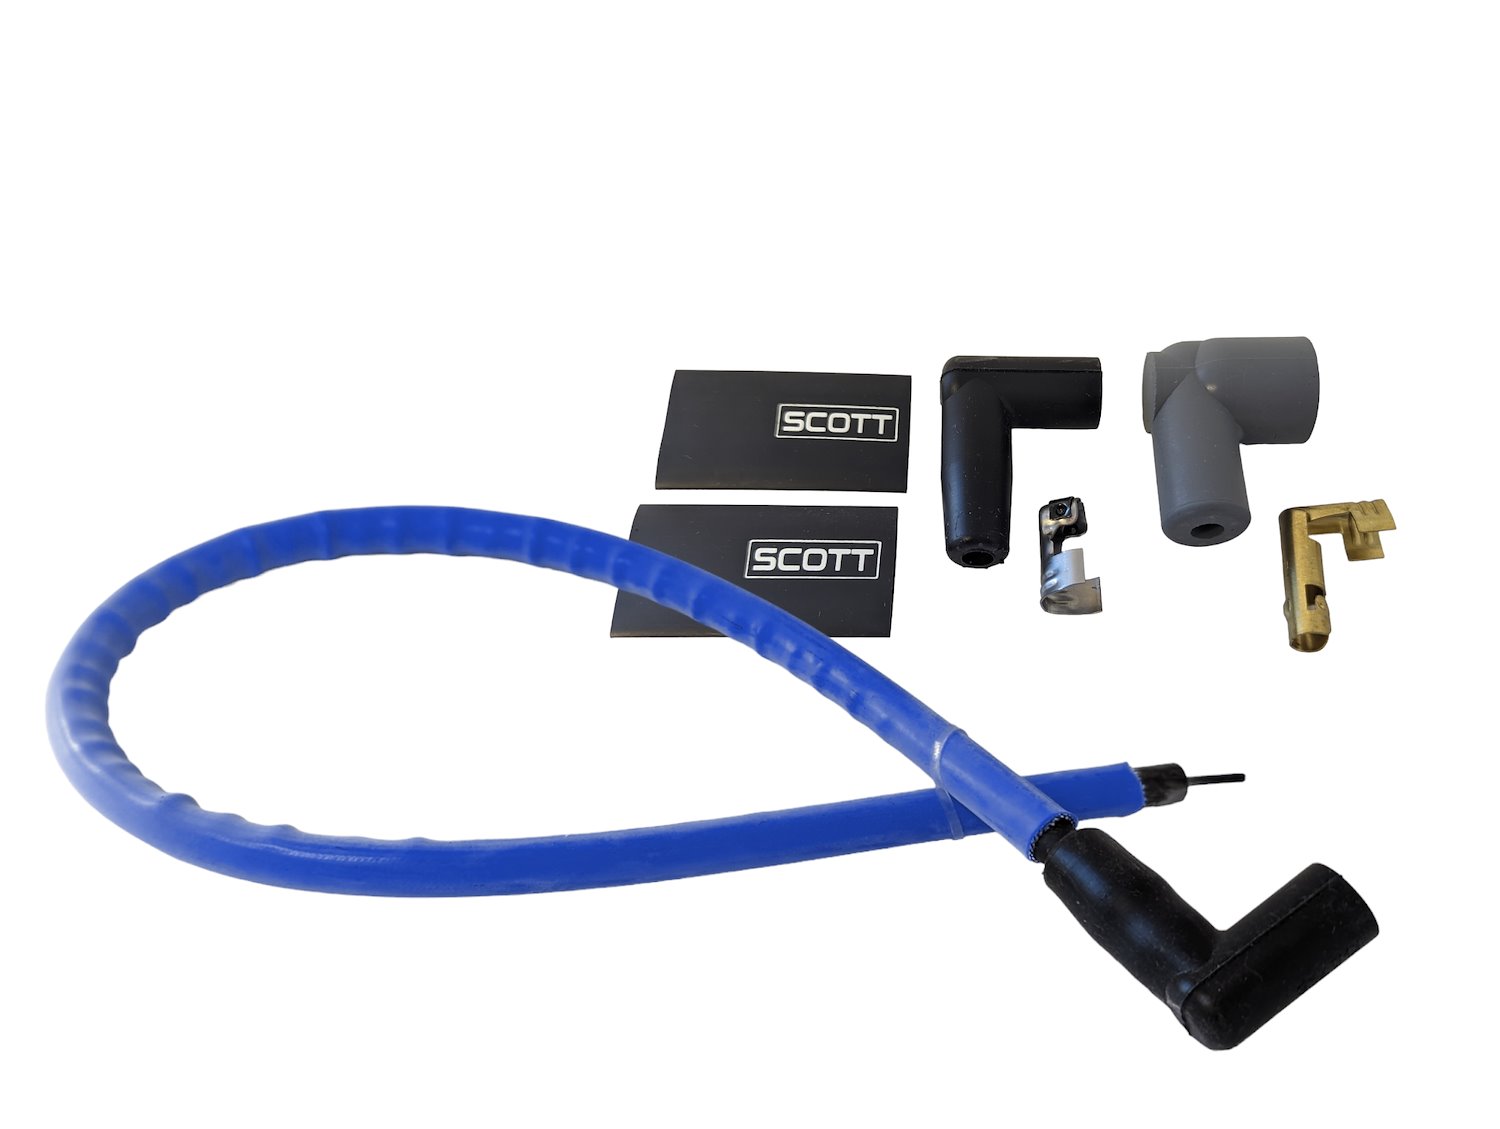 SPW300-CW36-4 36 in. Super Mag Fiberglass-Oversleeved Coil Wire Kit [Blue]